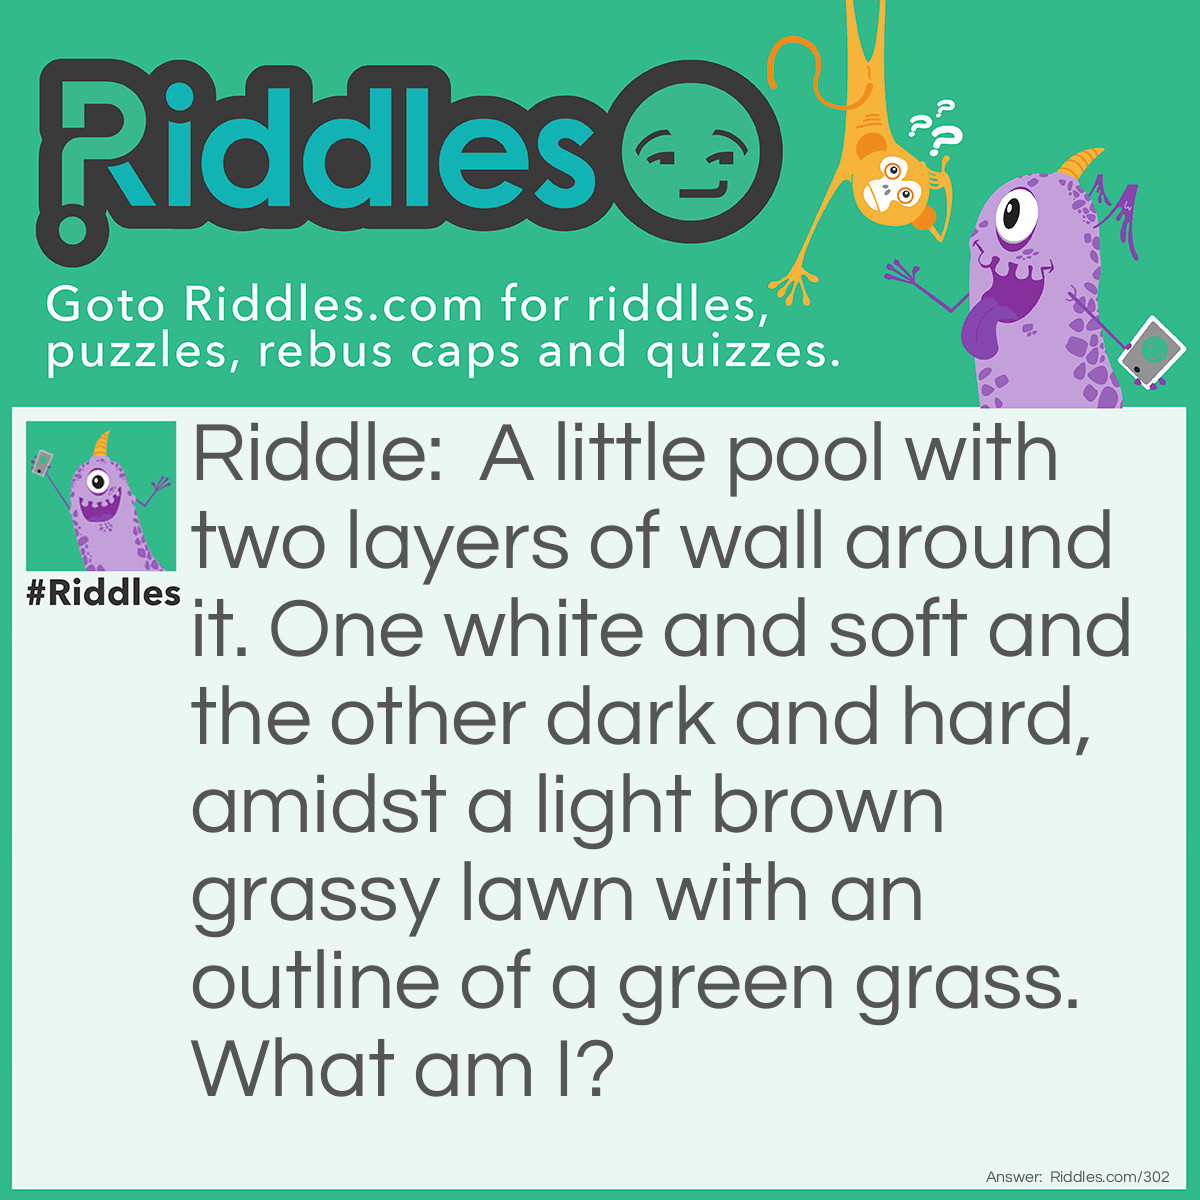 Riddle: A little pool with two layers of wall around it. One white and soft and the other dark and hard, amidst a light brown grassy lawn with an outline of a green grass. What am I? Answer: A Coconut.